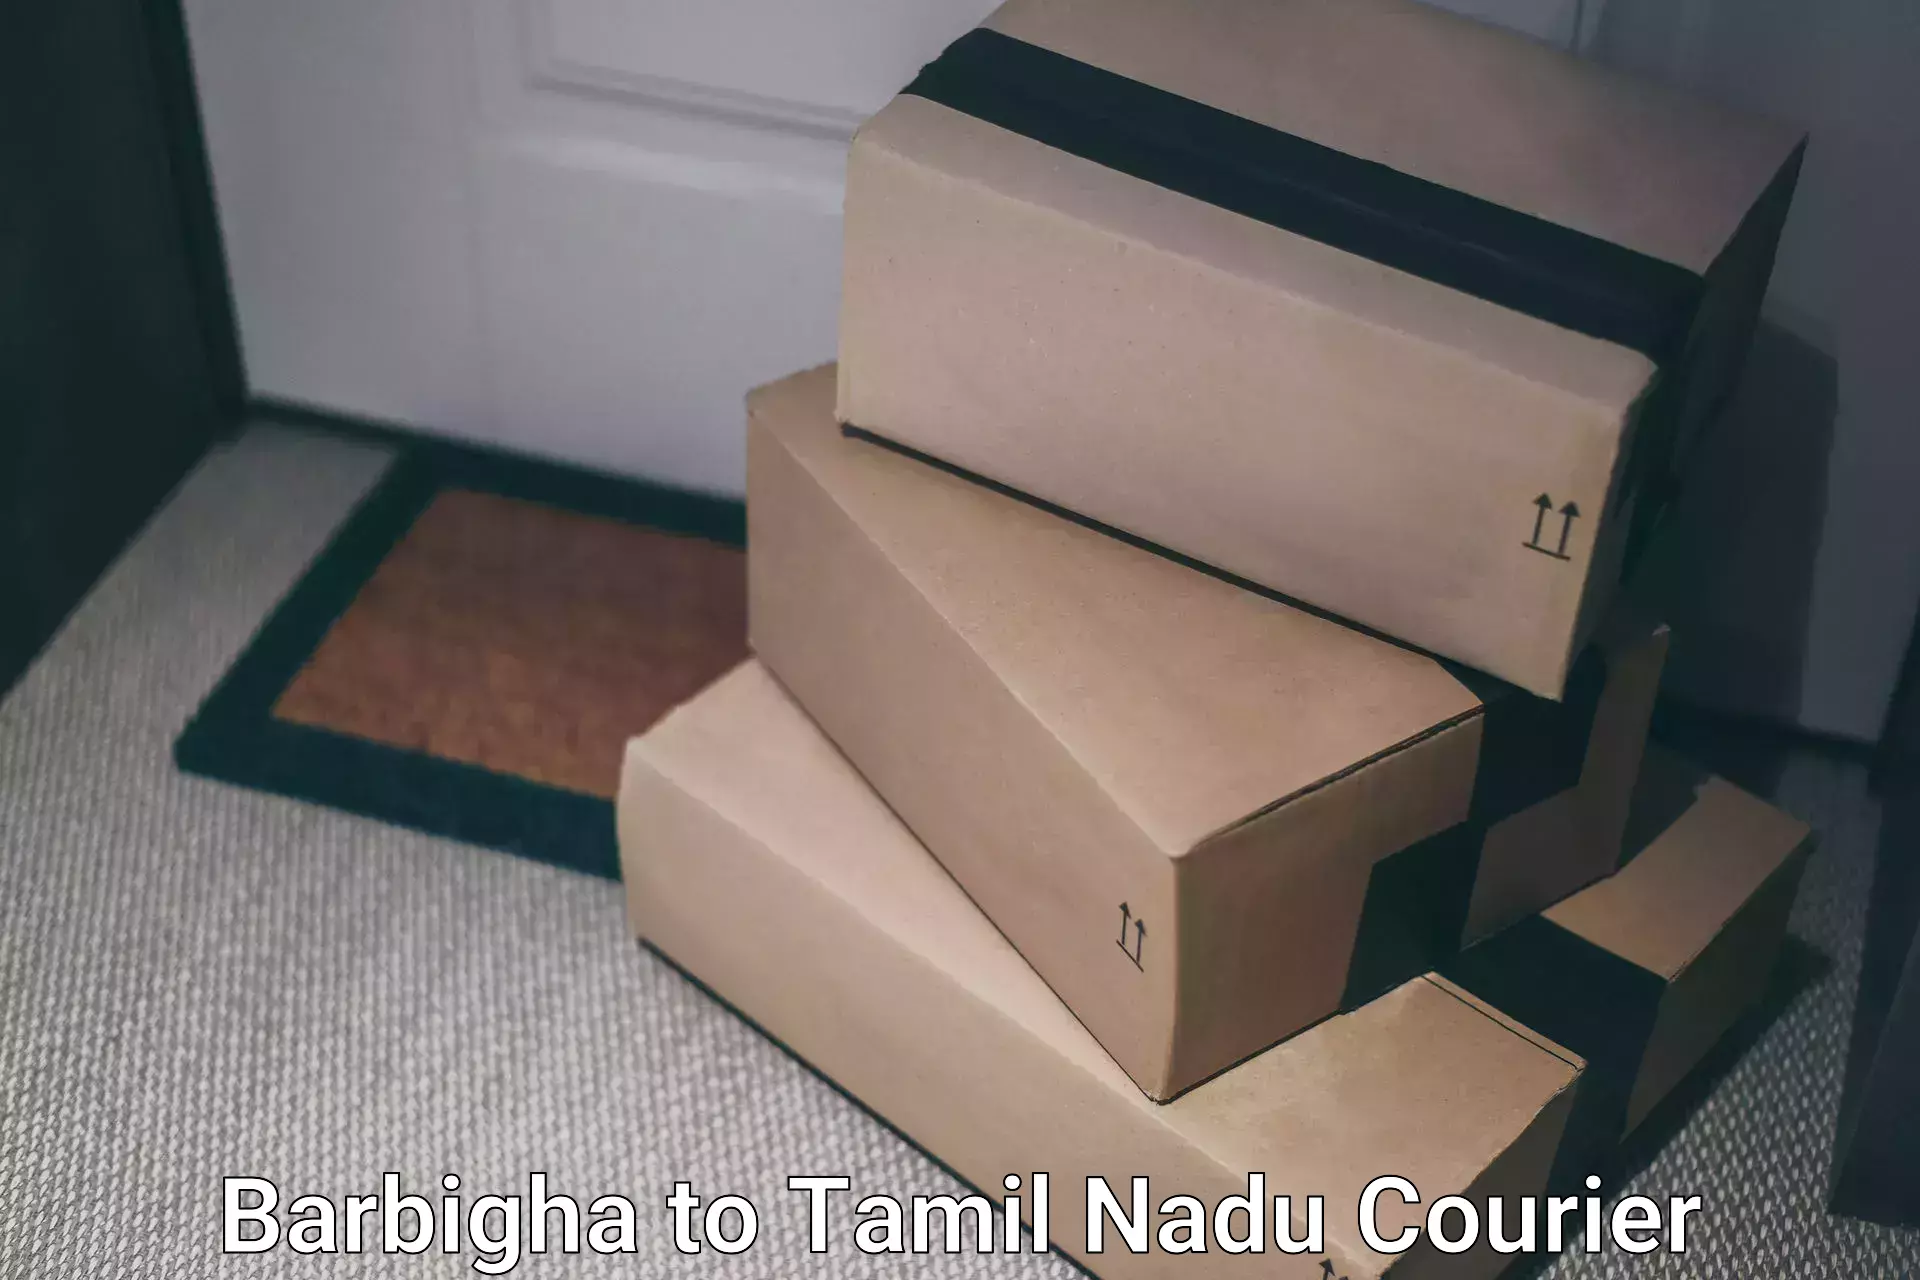 Cash on delivery service Barbigha to Chennai Port